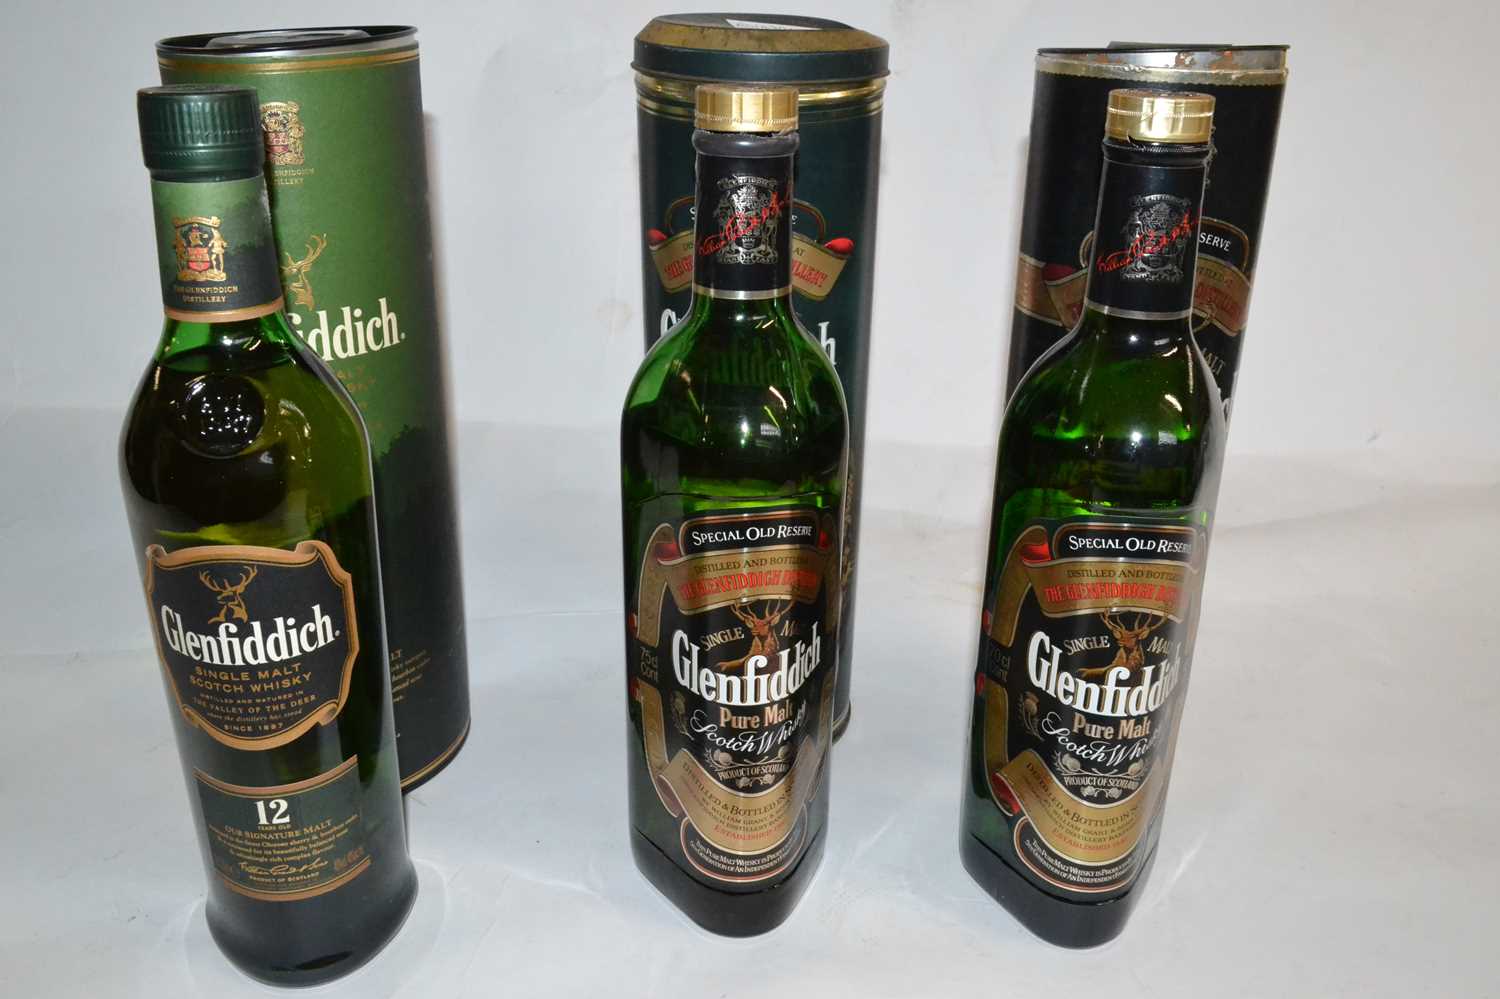 Three bottles of Glenfiddich single malt whisky, to include 12 years old in presentation tube